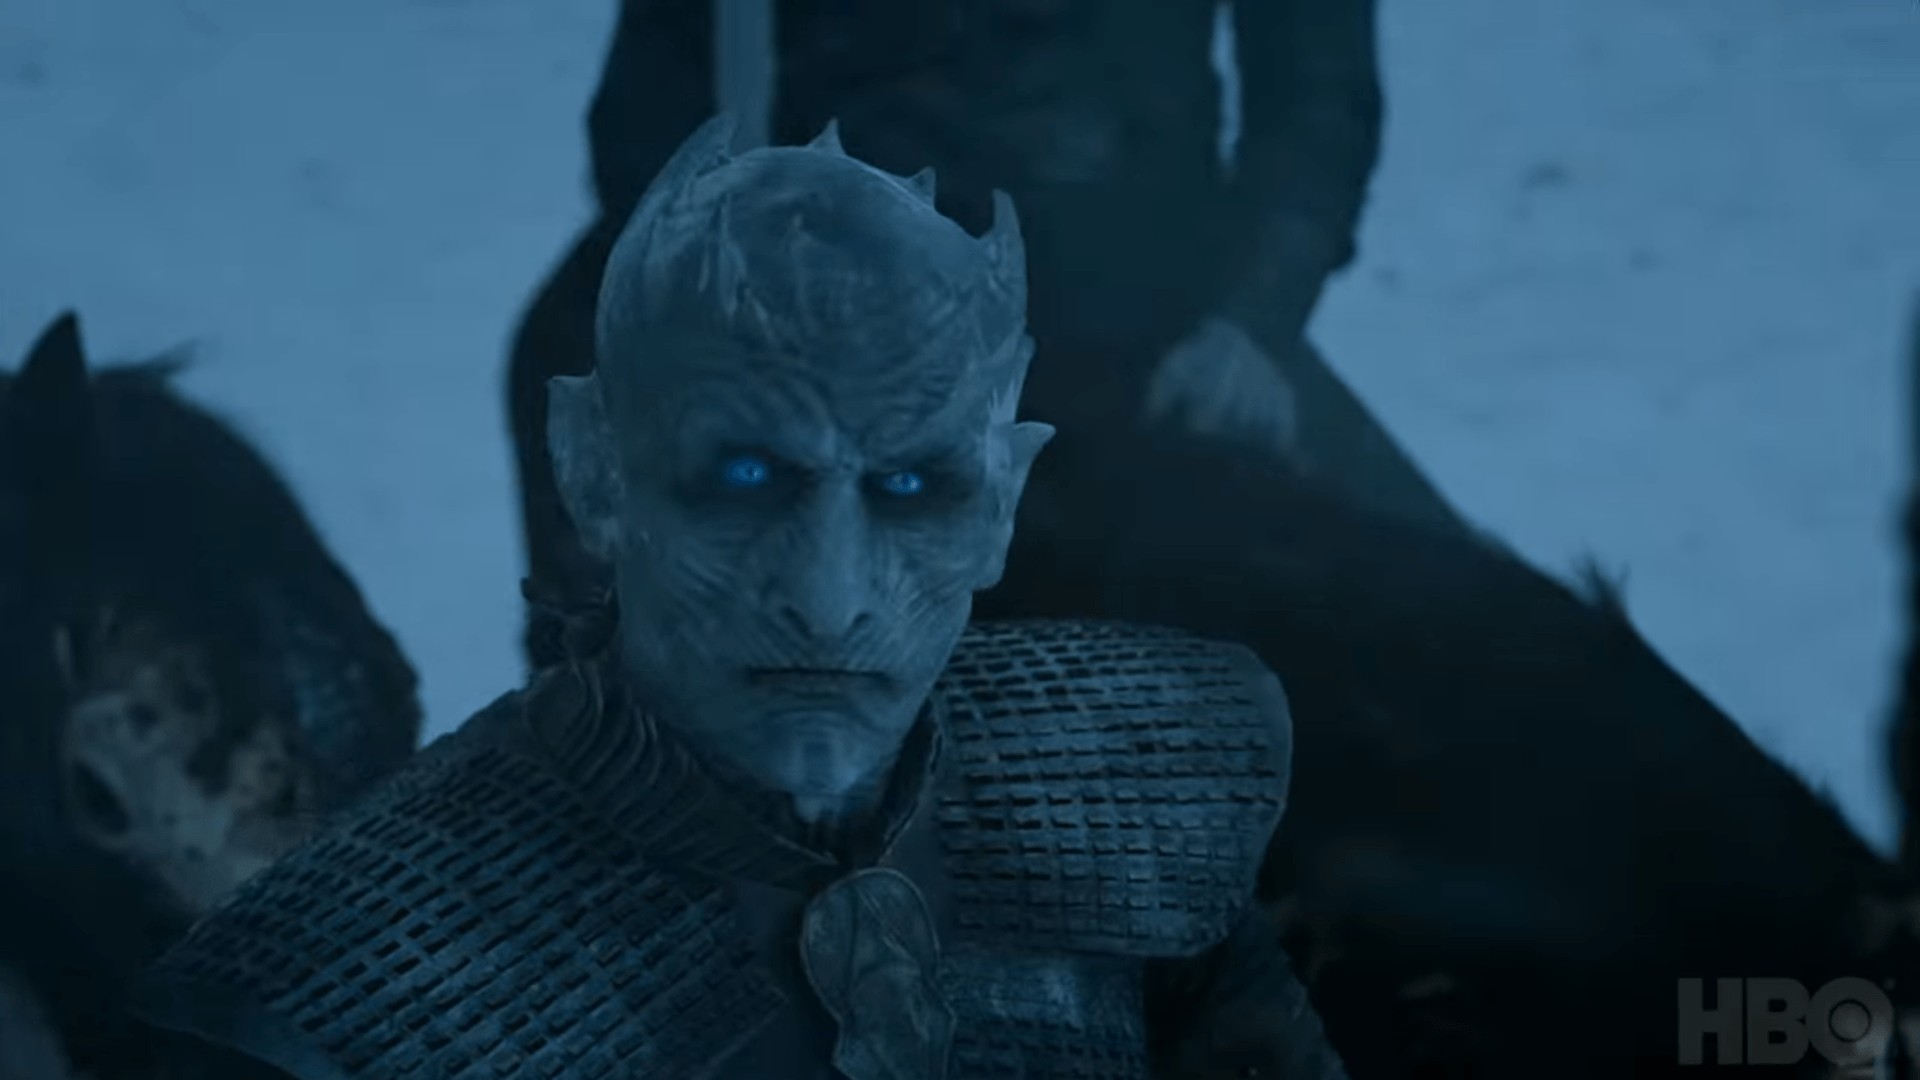 EVERYTHING The Night King is still played by Vladimir 'Furdo